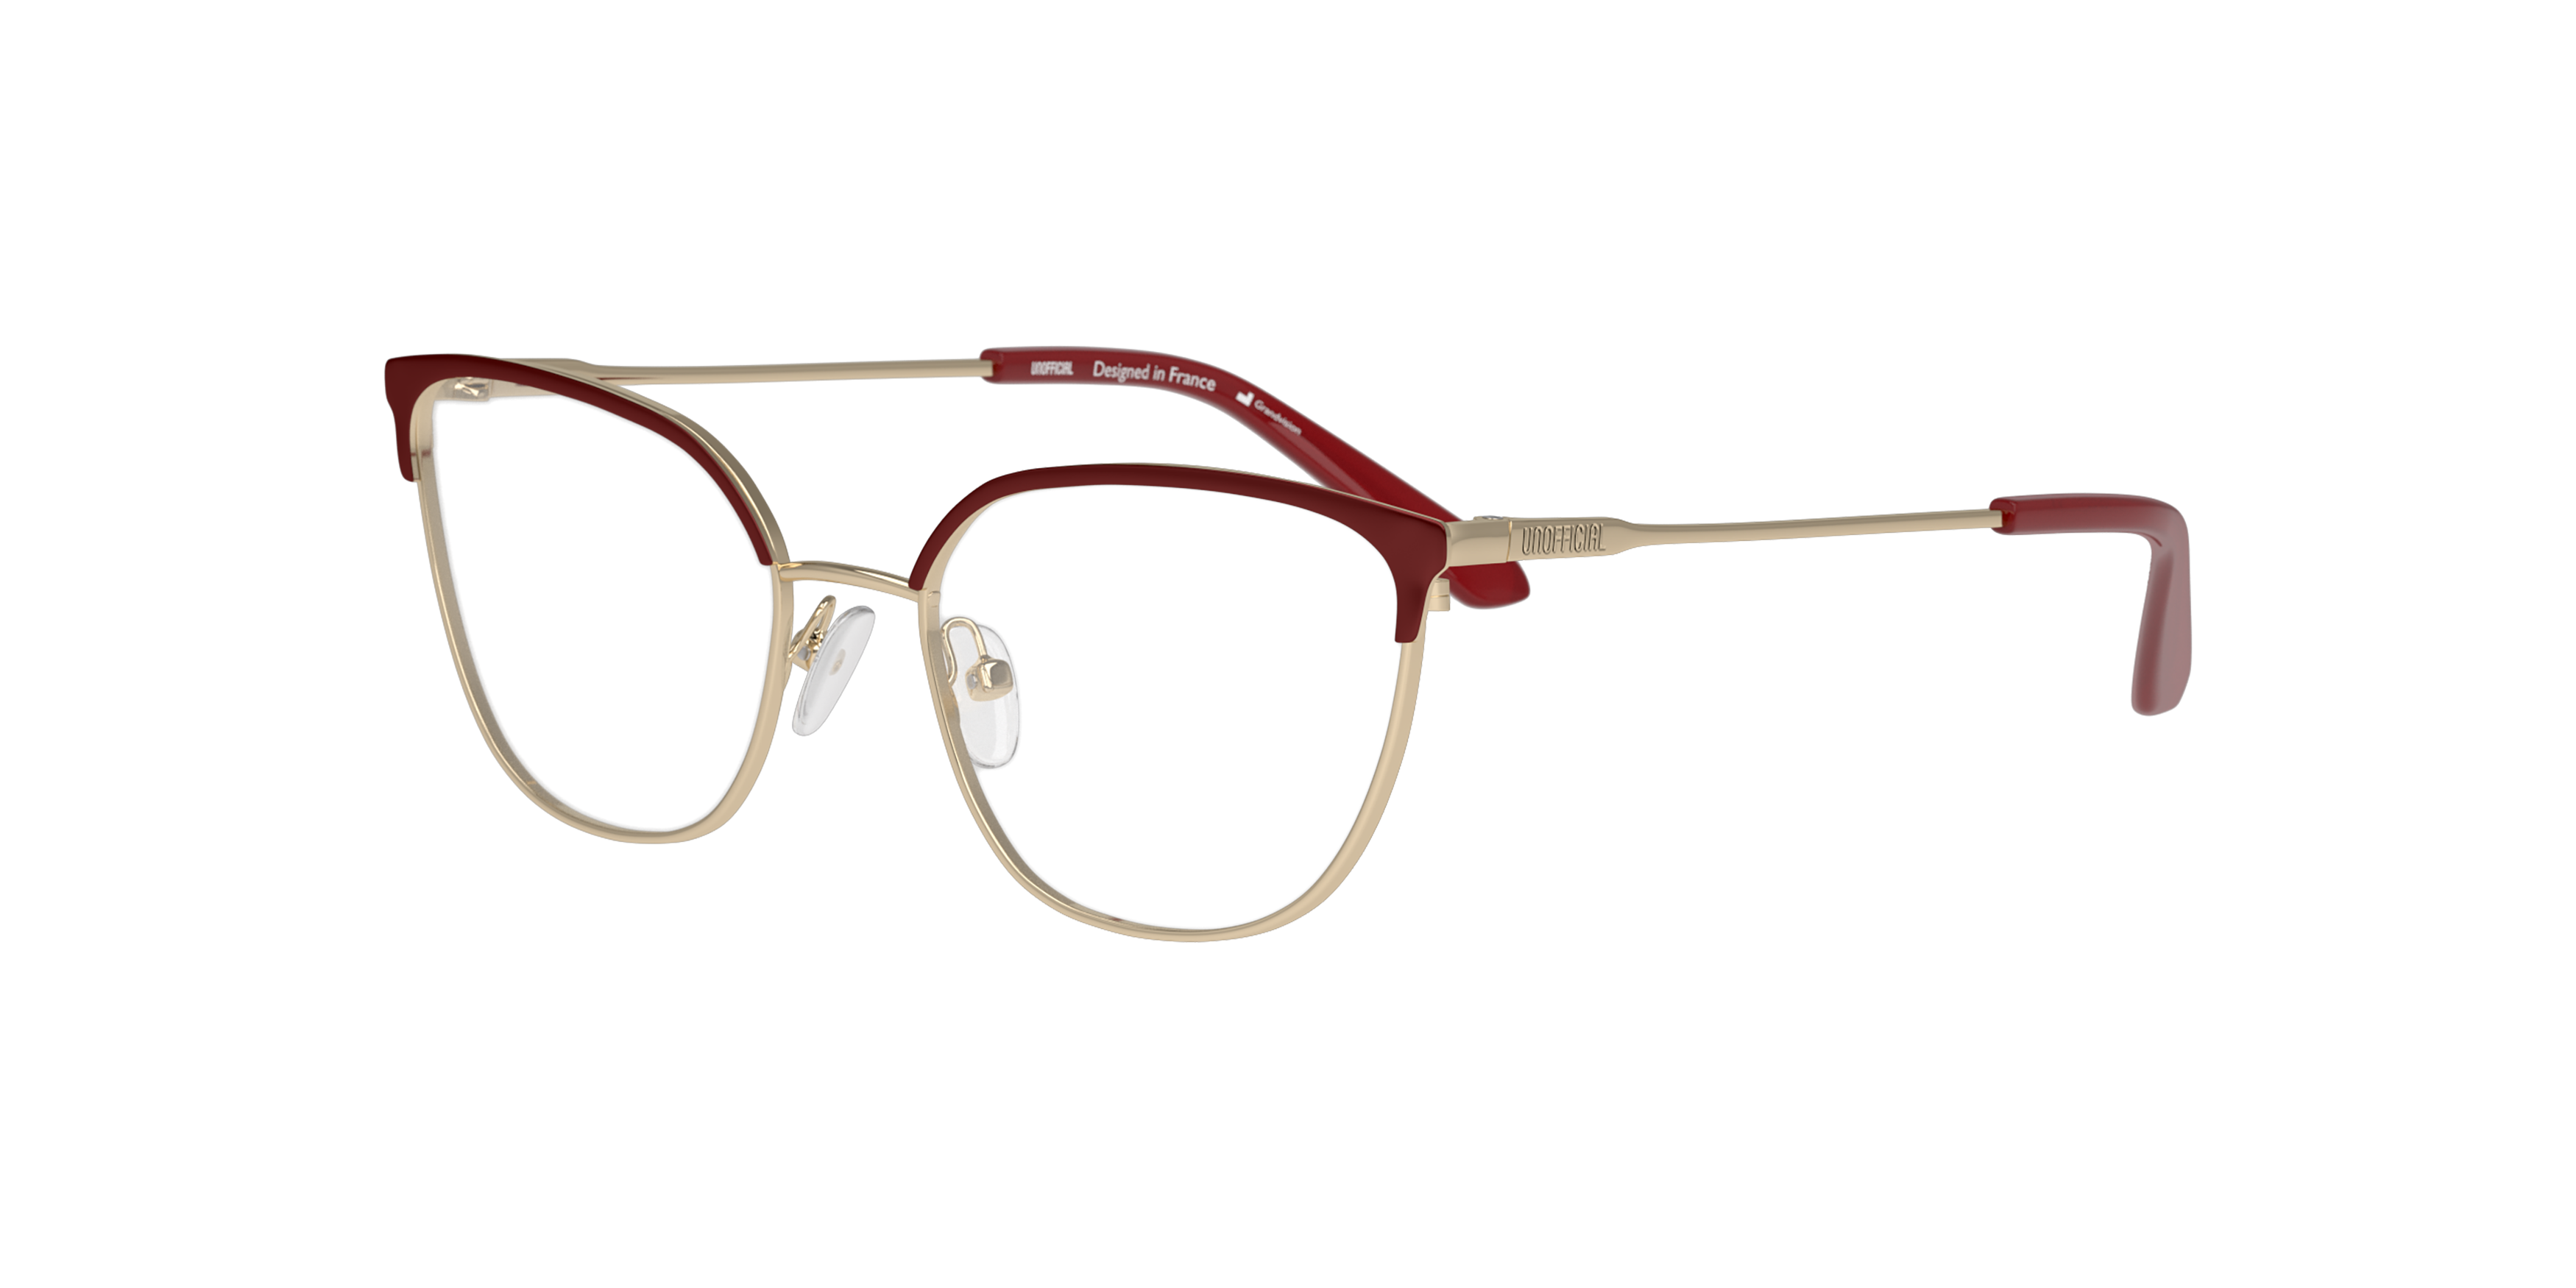 Angle_Left01 Unofficial UNOF0437 (RD00) Glasses Transparent / Burgundy